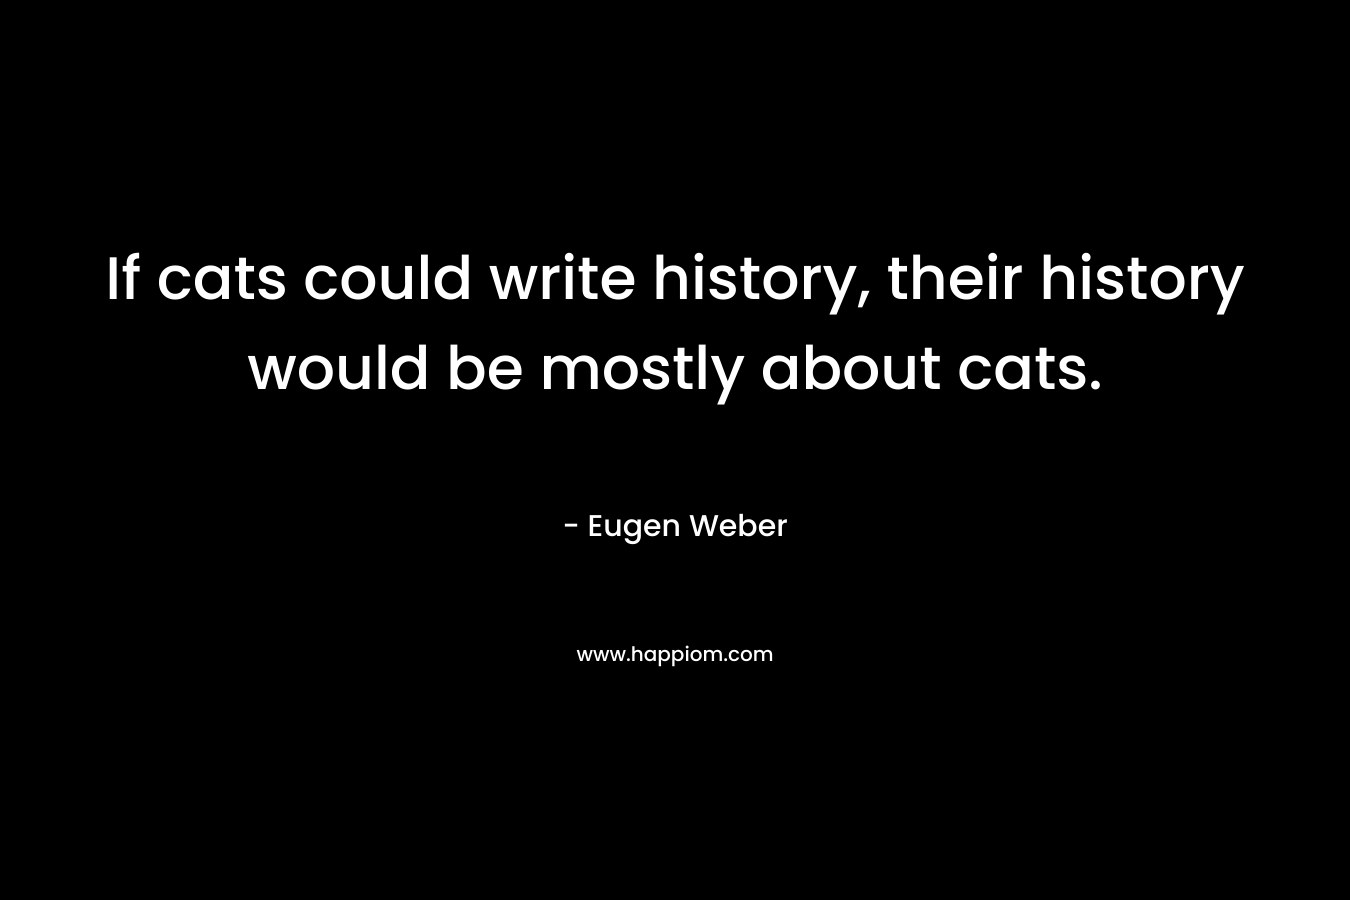 If cats could write history, their history would be mostly about cats.